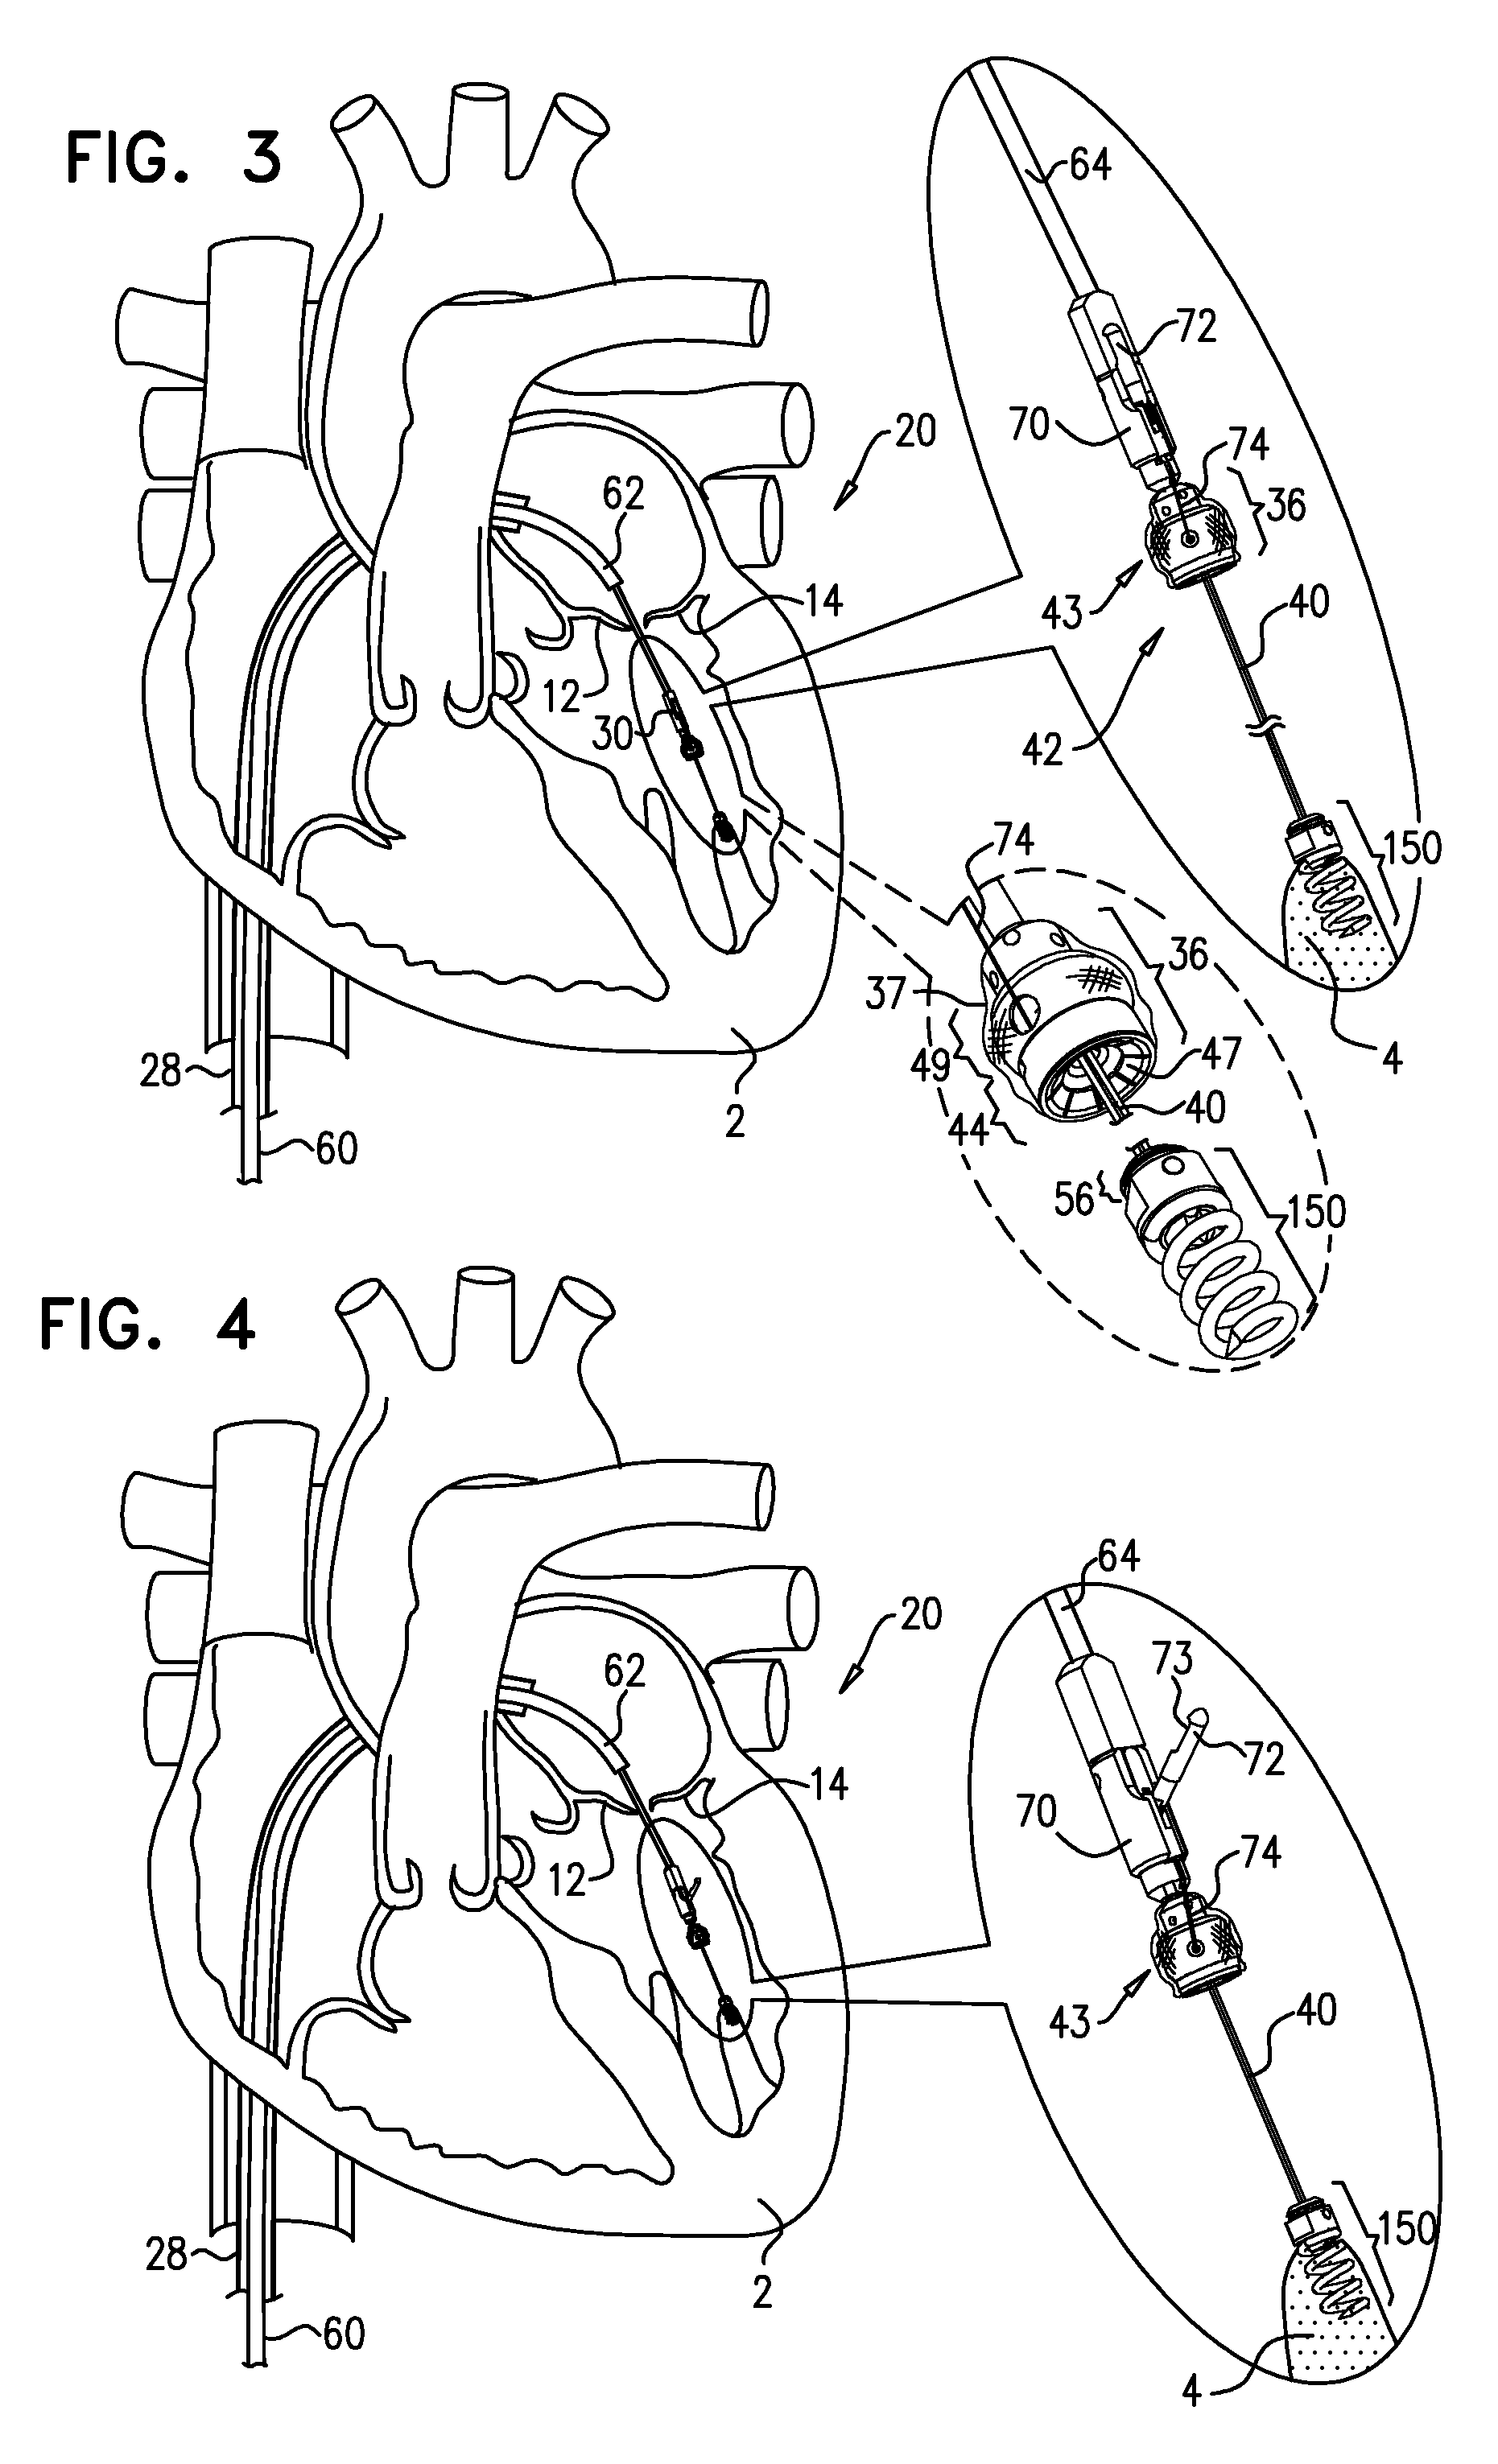 Apparatus and method for guide-wire based advancement of an adjustable implant